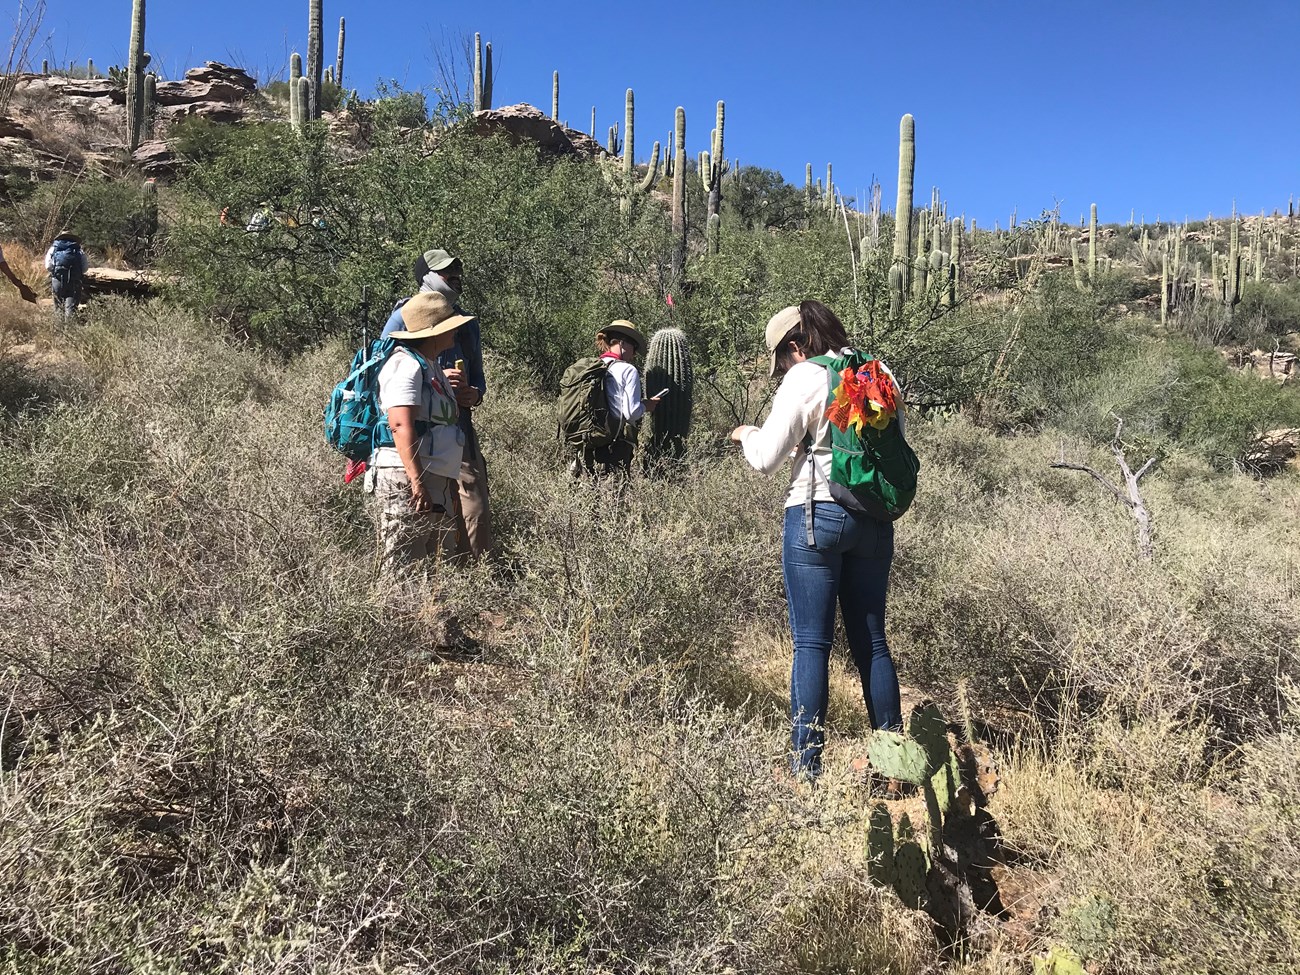 Two volunteers conversing, while one volunteer writes down data and the other one finds the coordinate of a saguaro